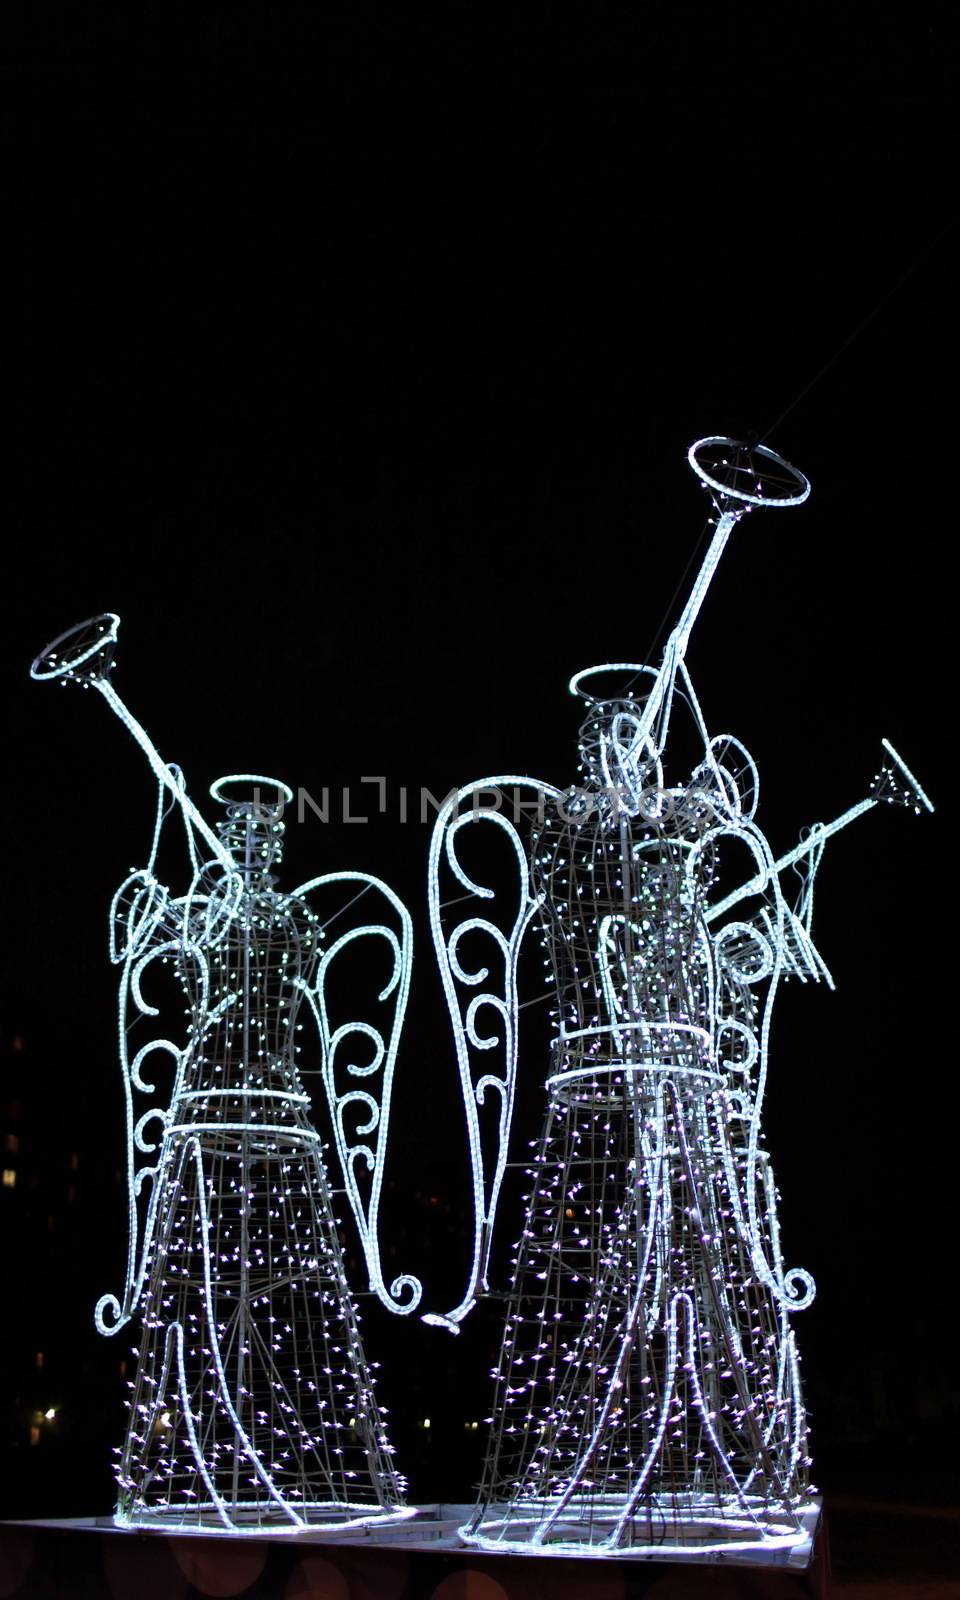 luminous figures of three angels with trumpets at night